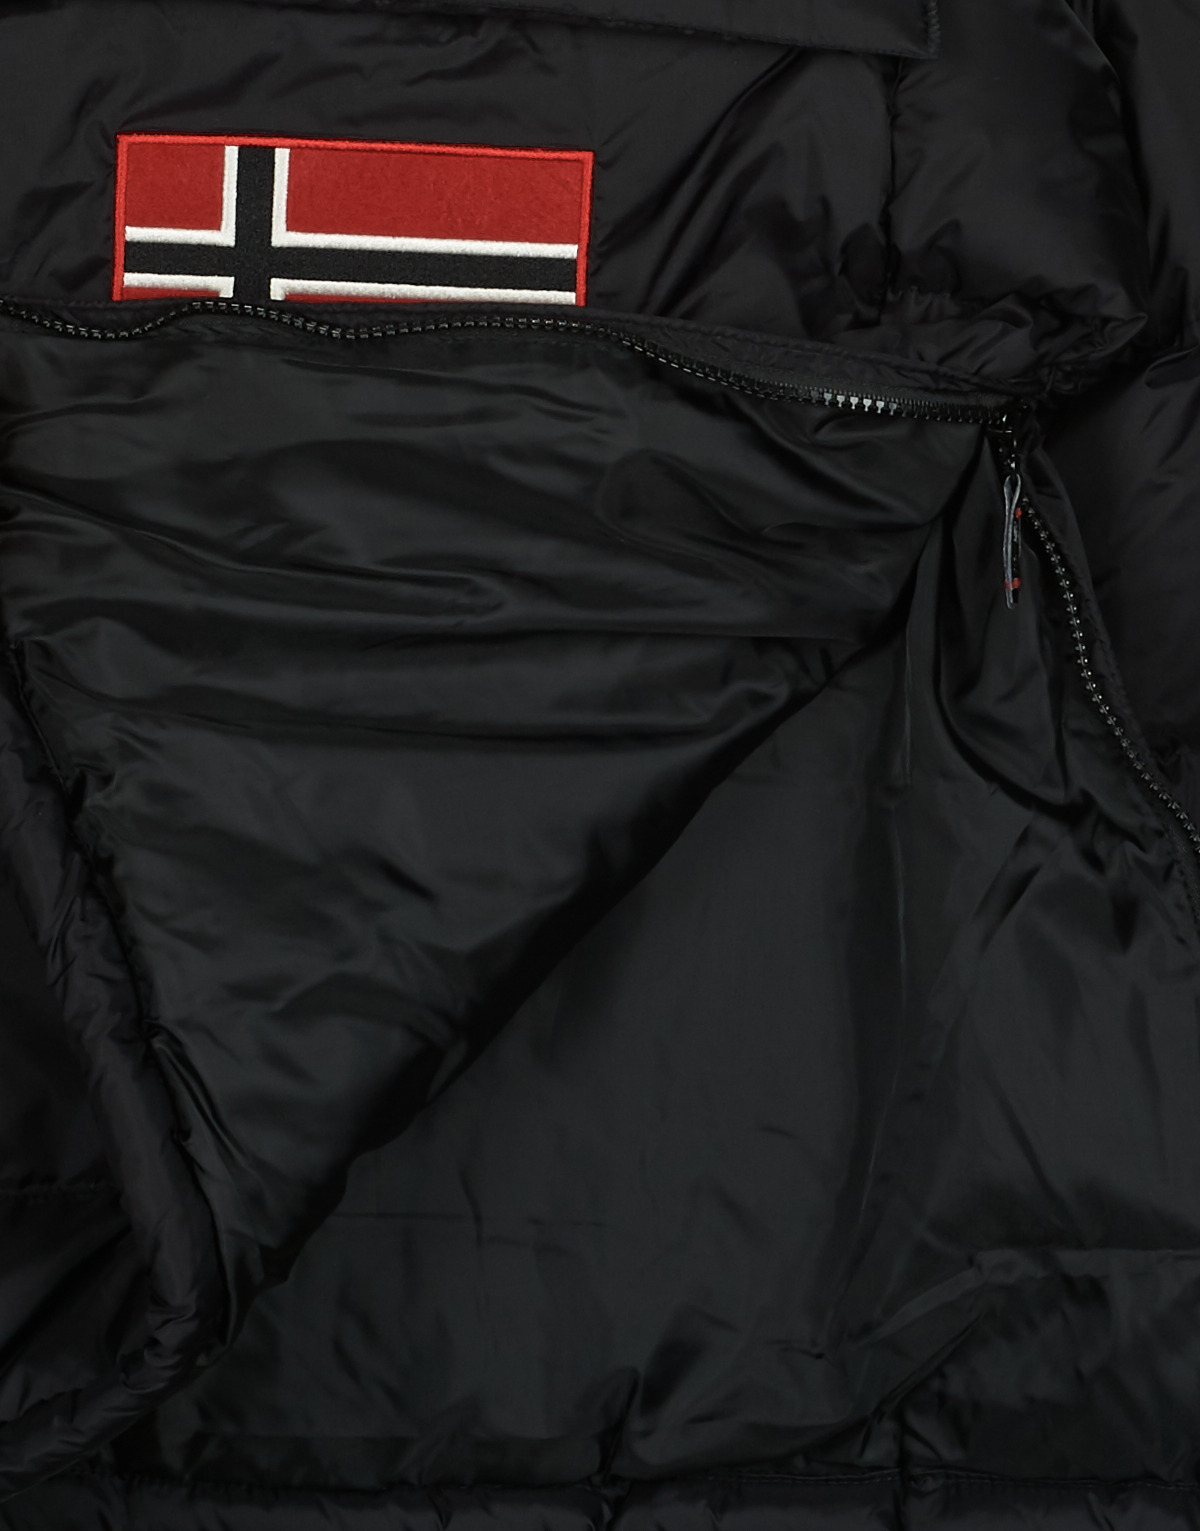 Geographical Norway Noir BELANCOLIE x0XHJ6xK